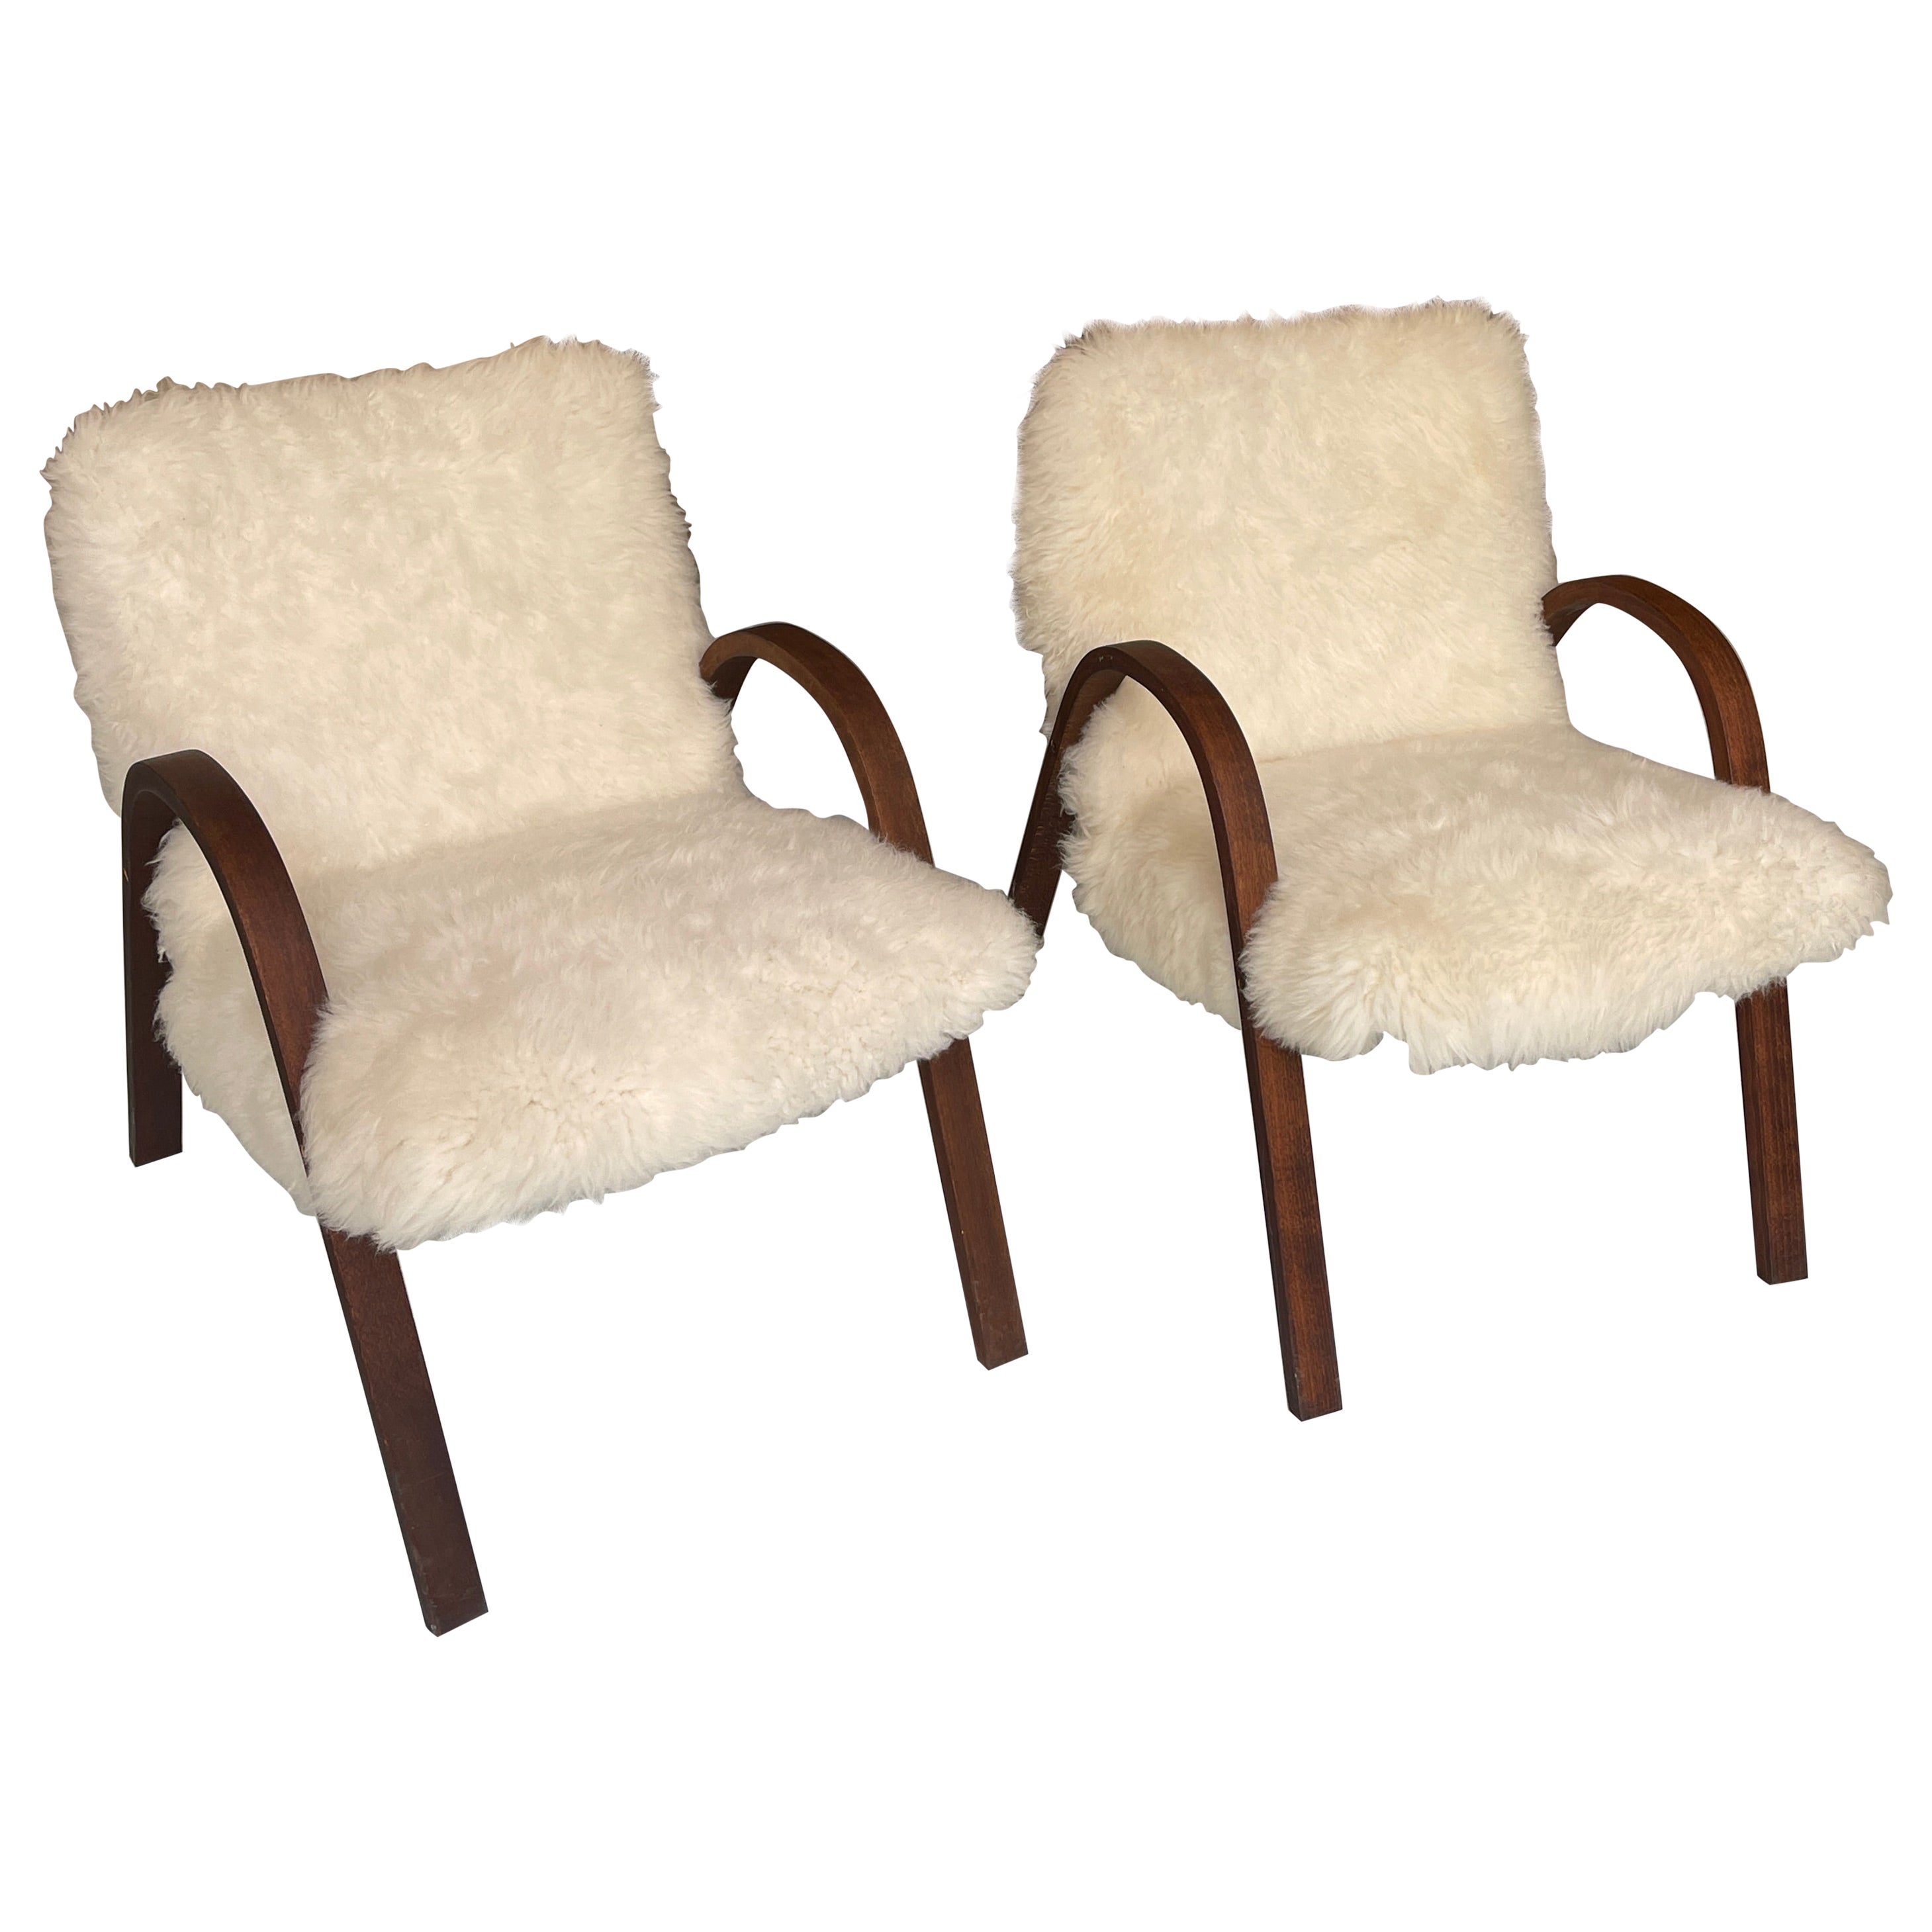 Bow Wood Chair with Sheepskin